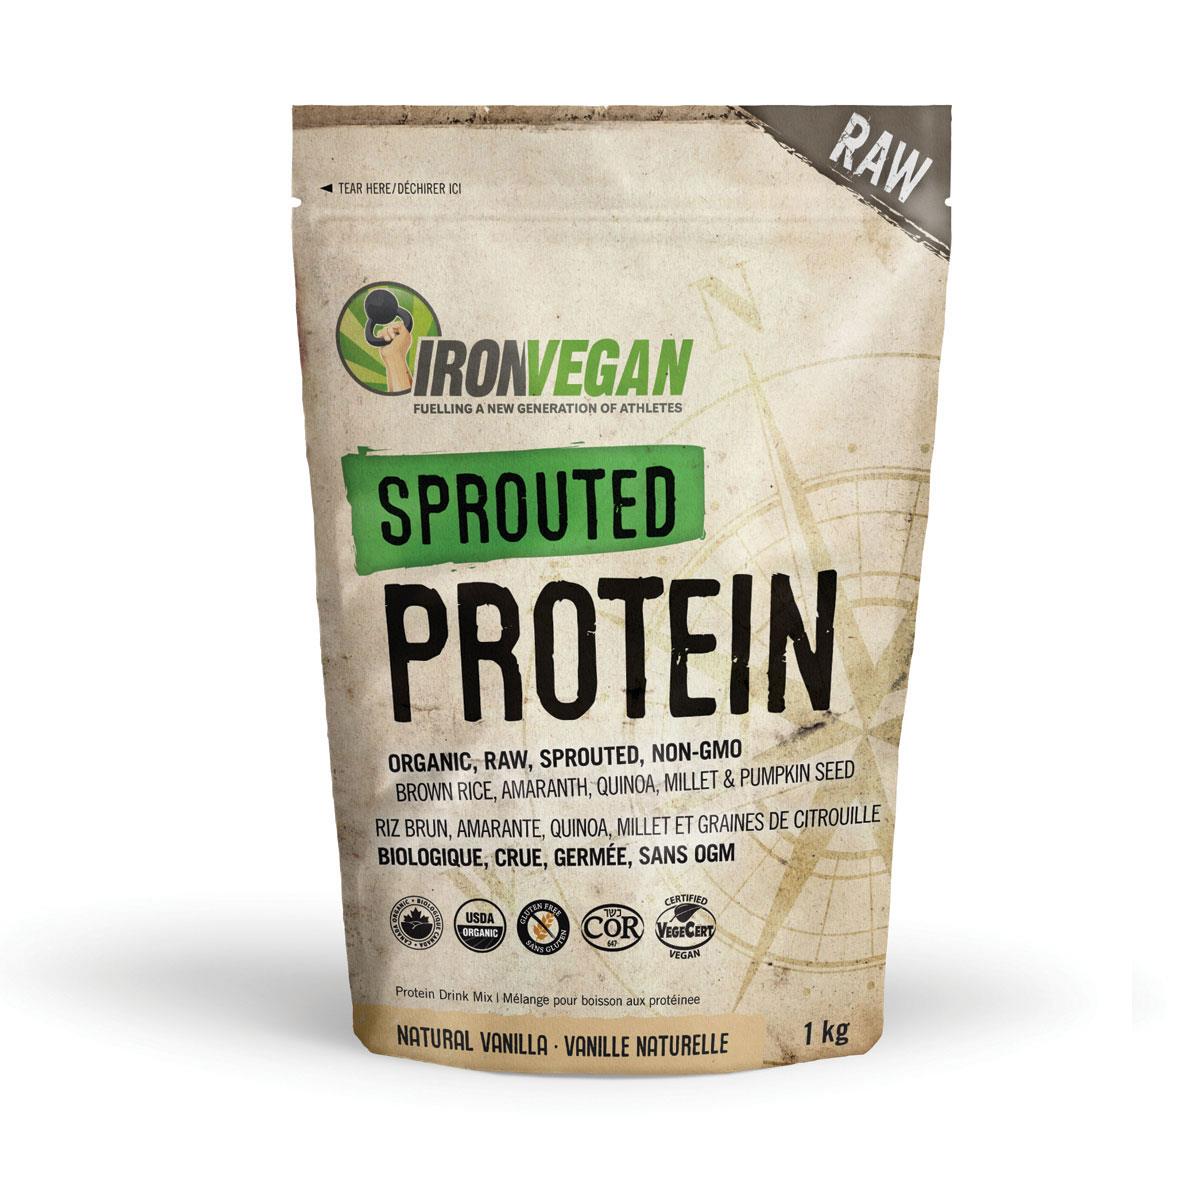 Sprouted Protein (Vanilla) - 1kg